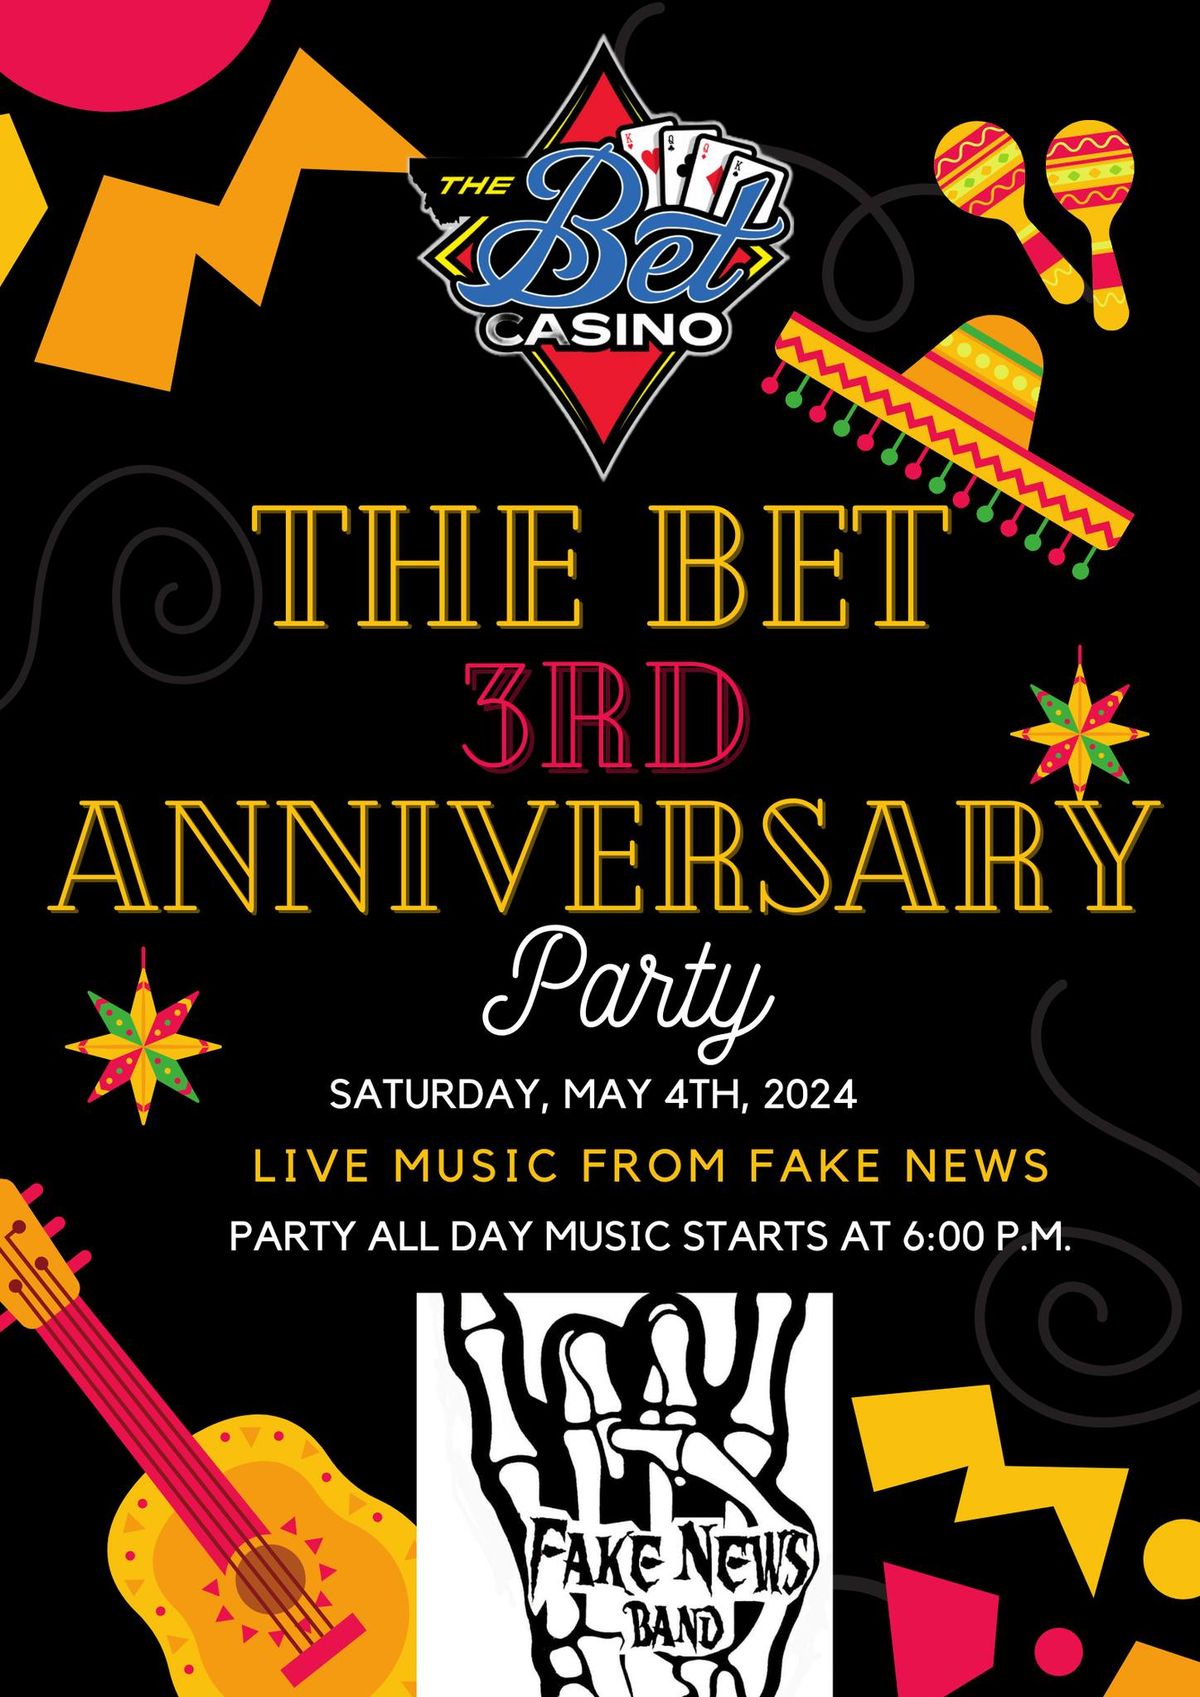 The Bet 3rd Anniversary Party!